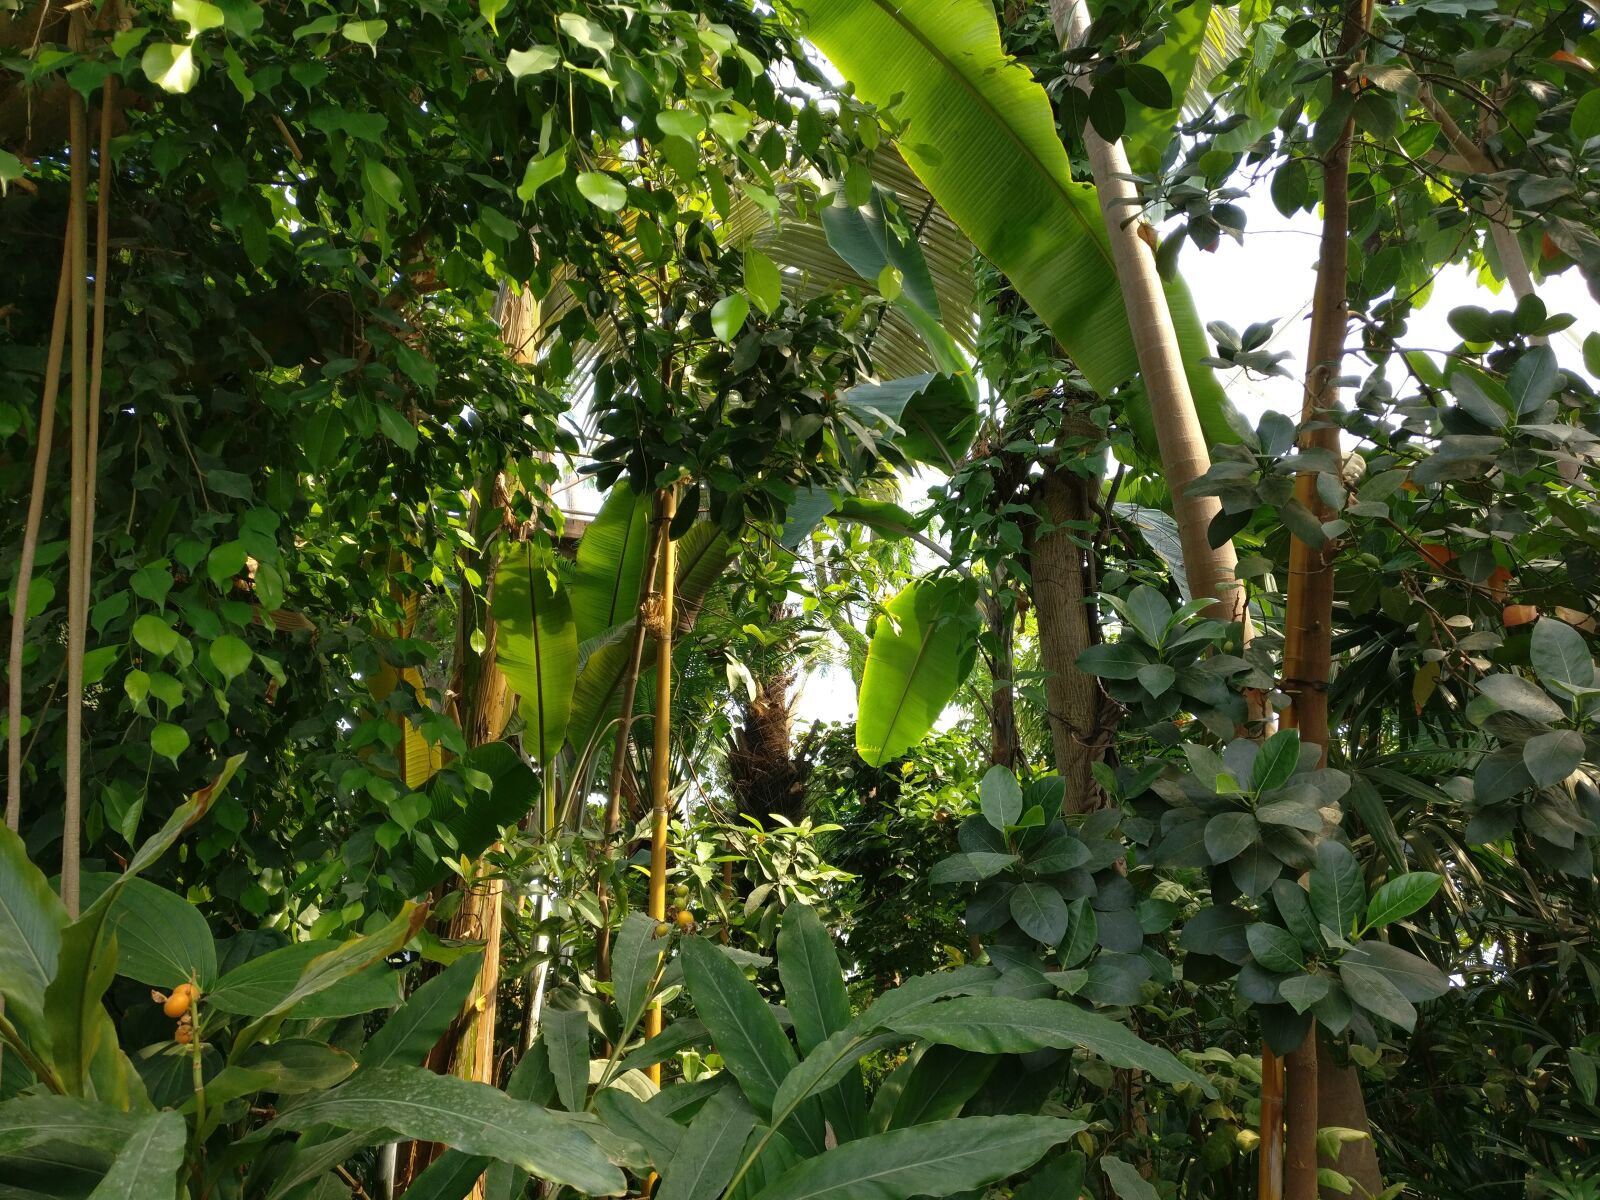 OnePlus A3003 sample photo. Jungle, greenhouse, nature photography